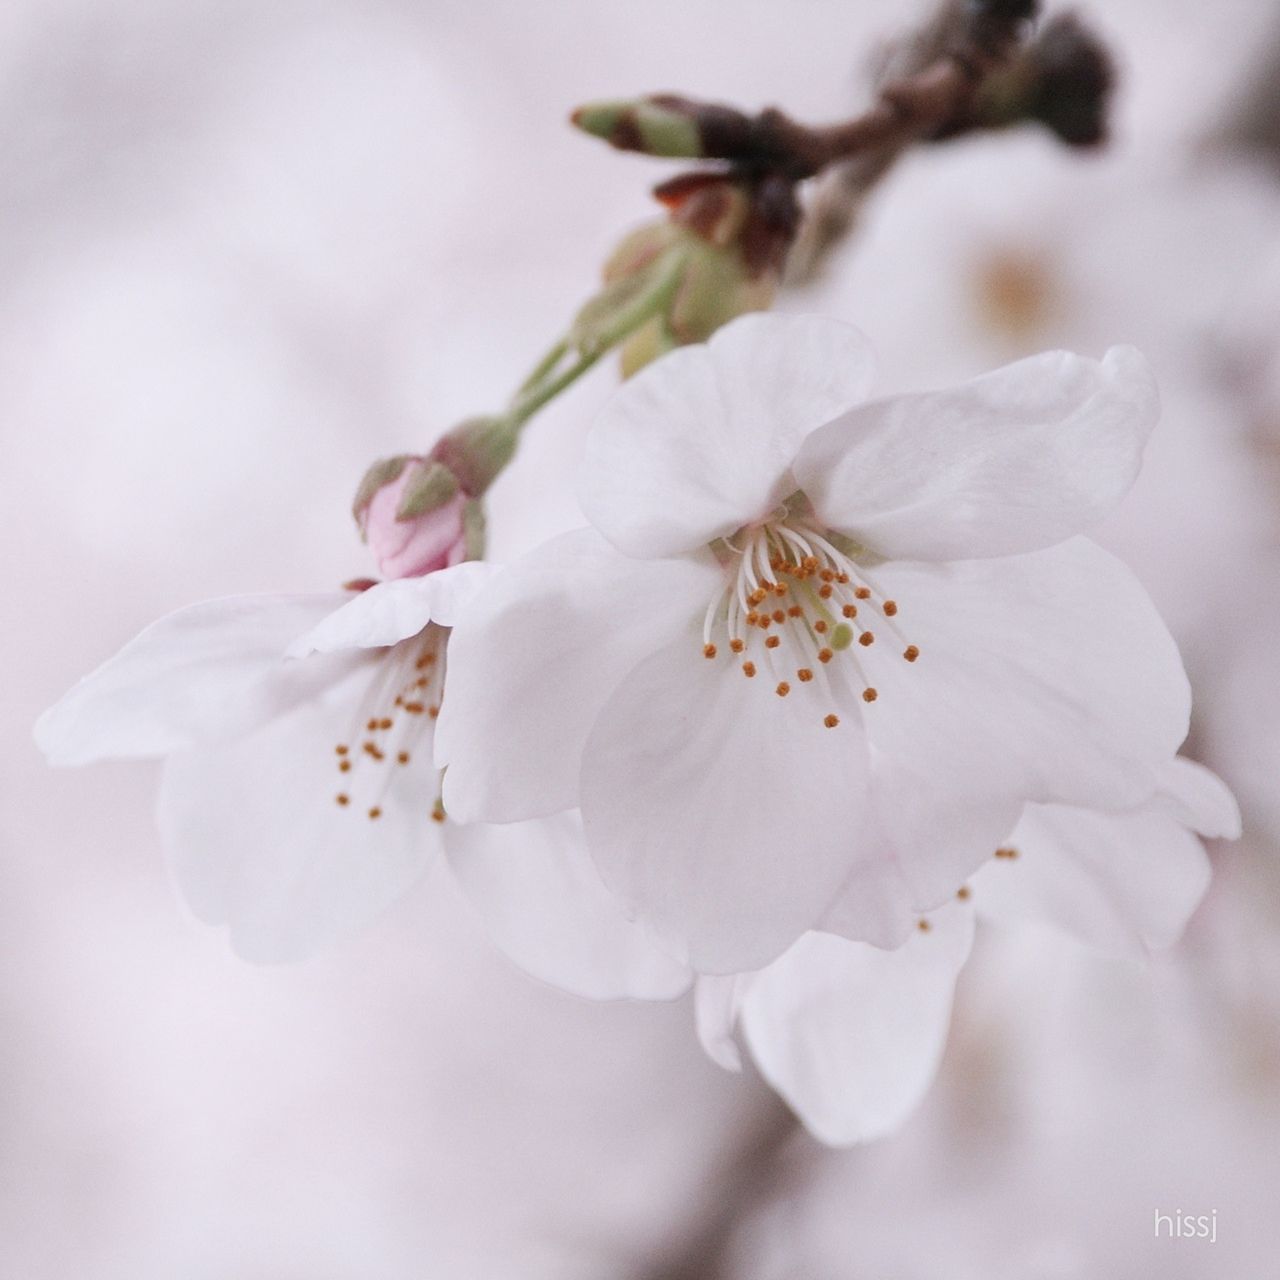 flower, freshness, petal, fragility, growth, flower head, white color, beauty in nature, close-up, focus on foreground, nature, blooming, selective focus, blossom, stamen, pollen, in bloom, bud, plant, springtime